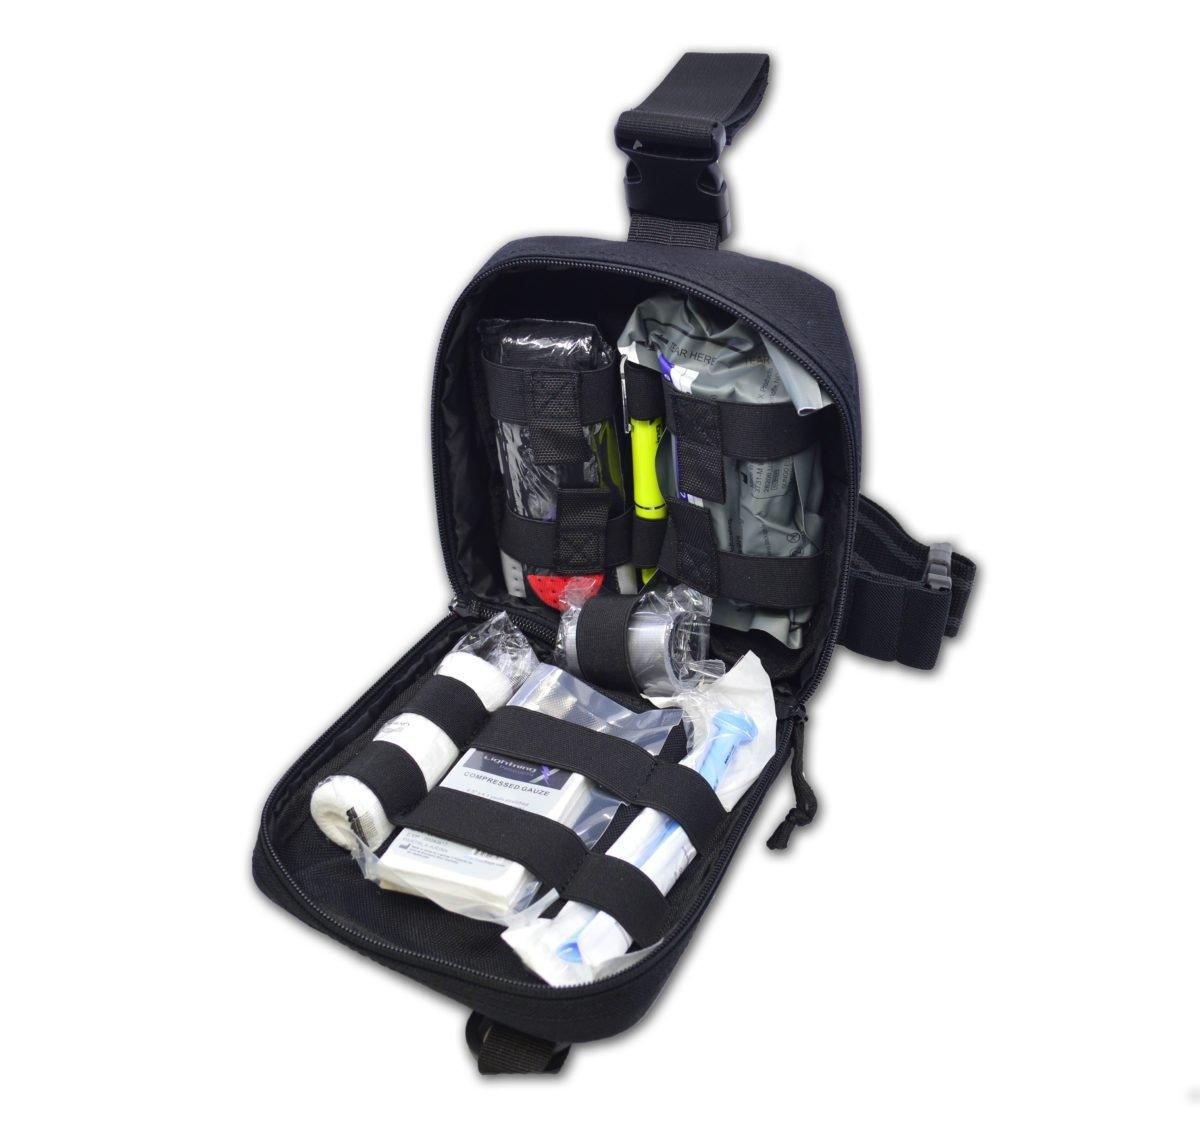 A primer on Individual First Aid Kits - IFAK2 - MED-TAC International Corp.